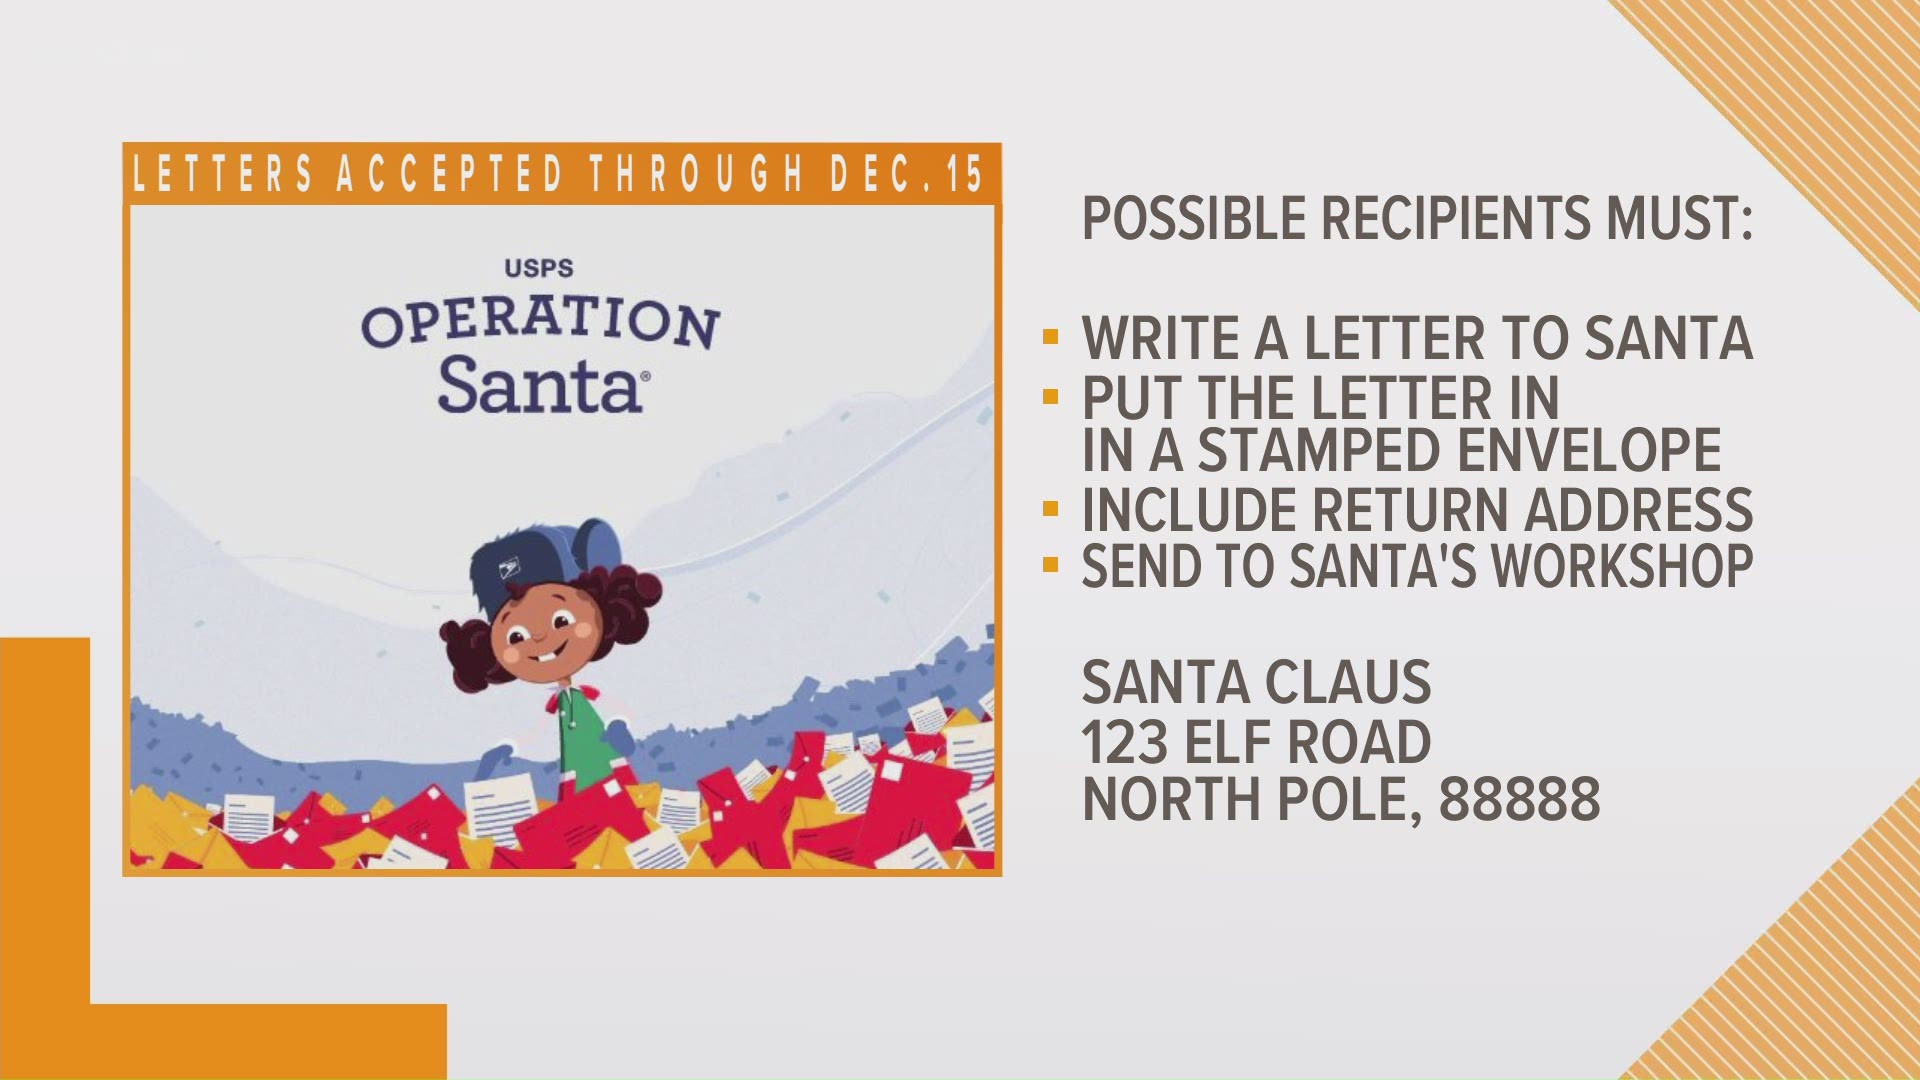 This is the last weekend to send in your letters to Santa if you want to participate in the USPS Operation Santa program. Digital Journalist Megan Ball shares more.